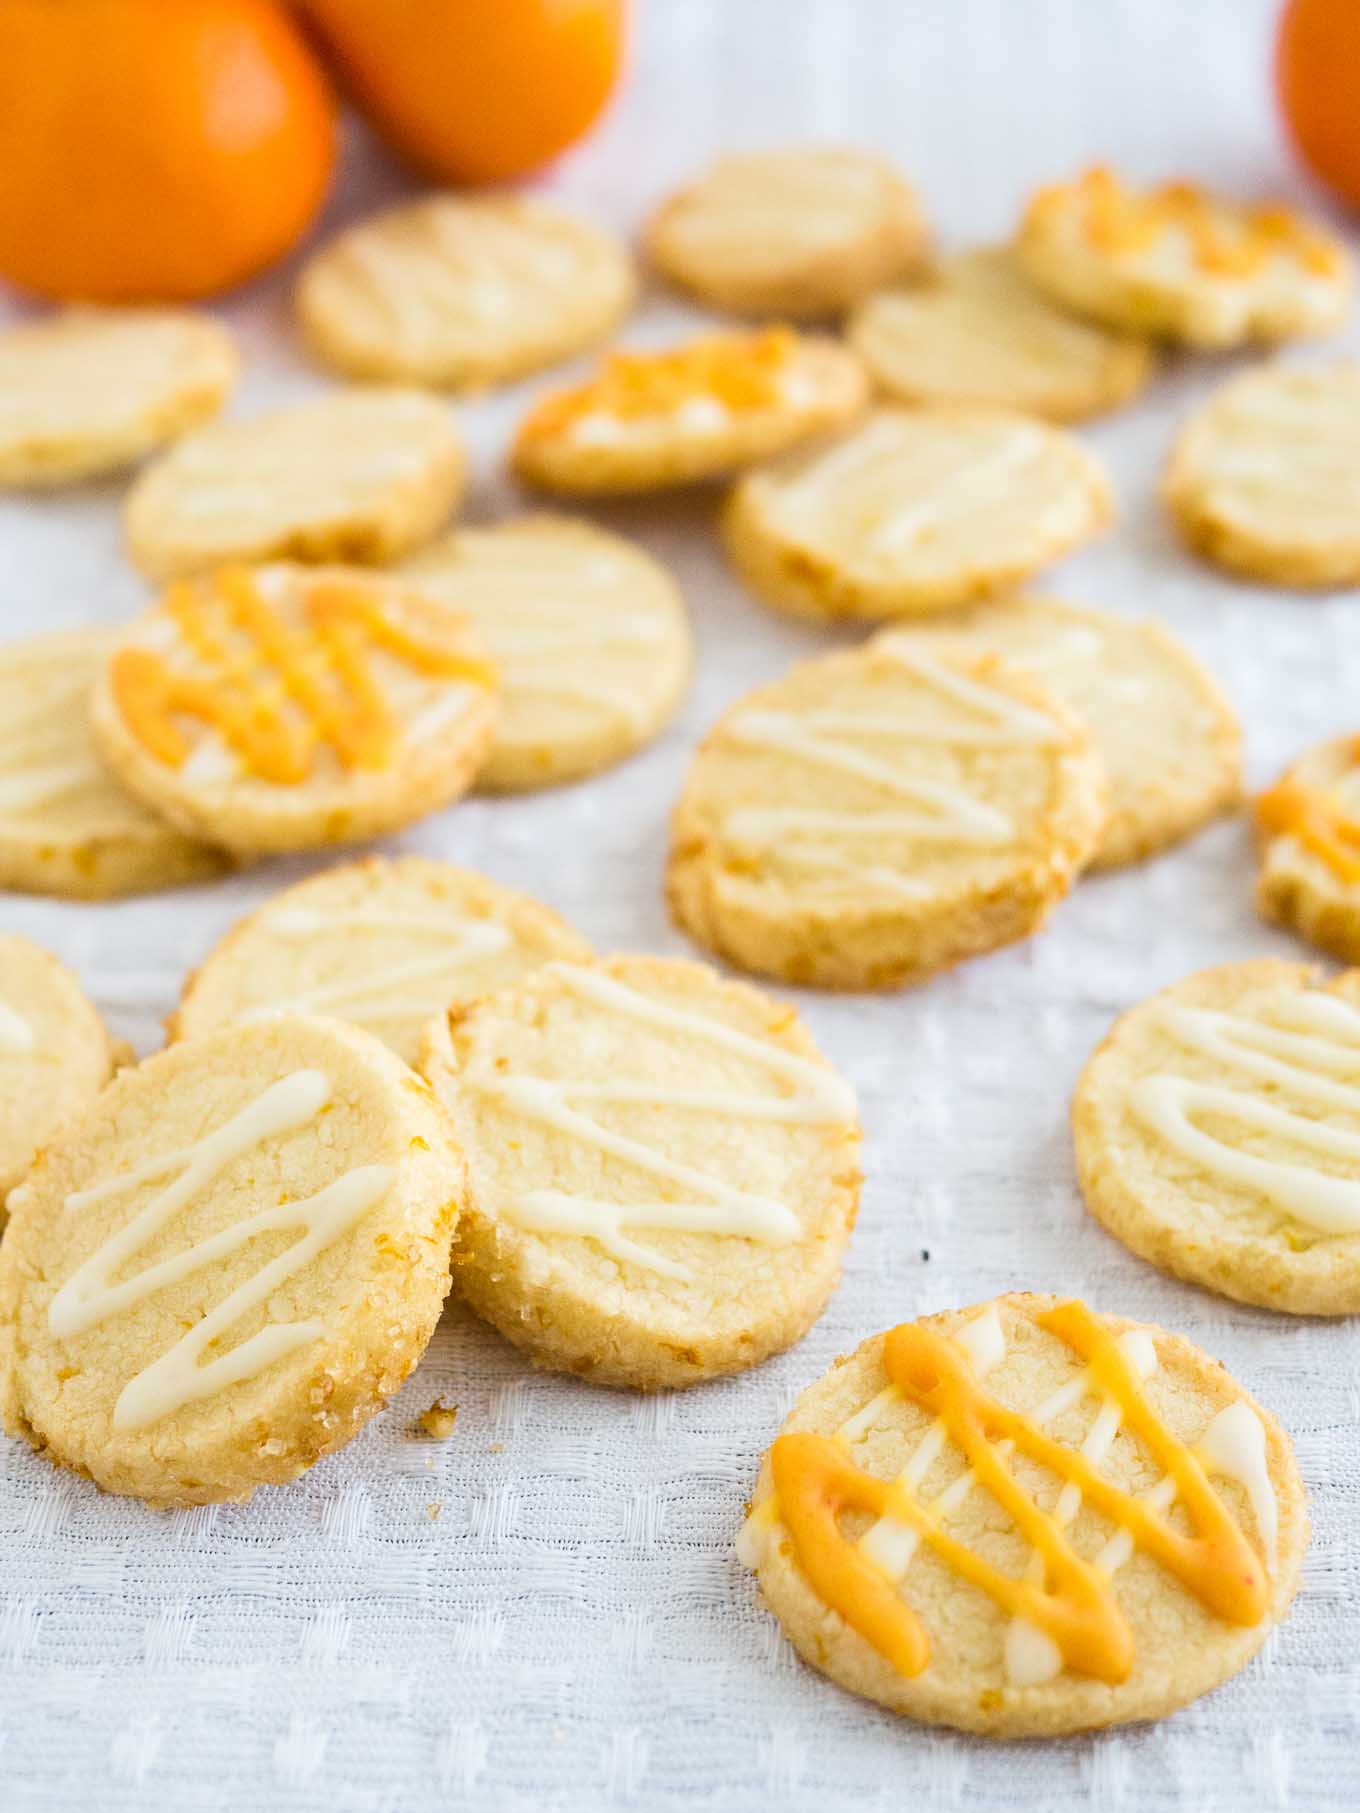 These Slice & Bake Orange Almond Cookies are soft in the center and crunchy on the edges! A flavorful and easy-to-make cookie with lots of orange aroma and ground almonds.